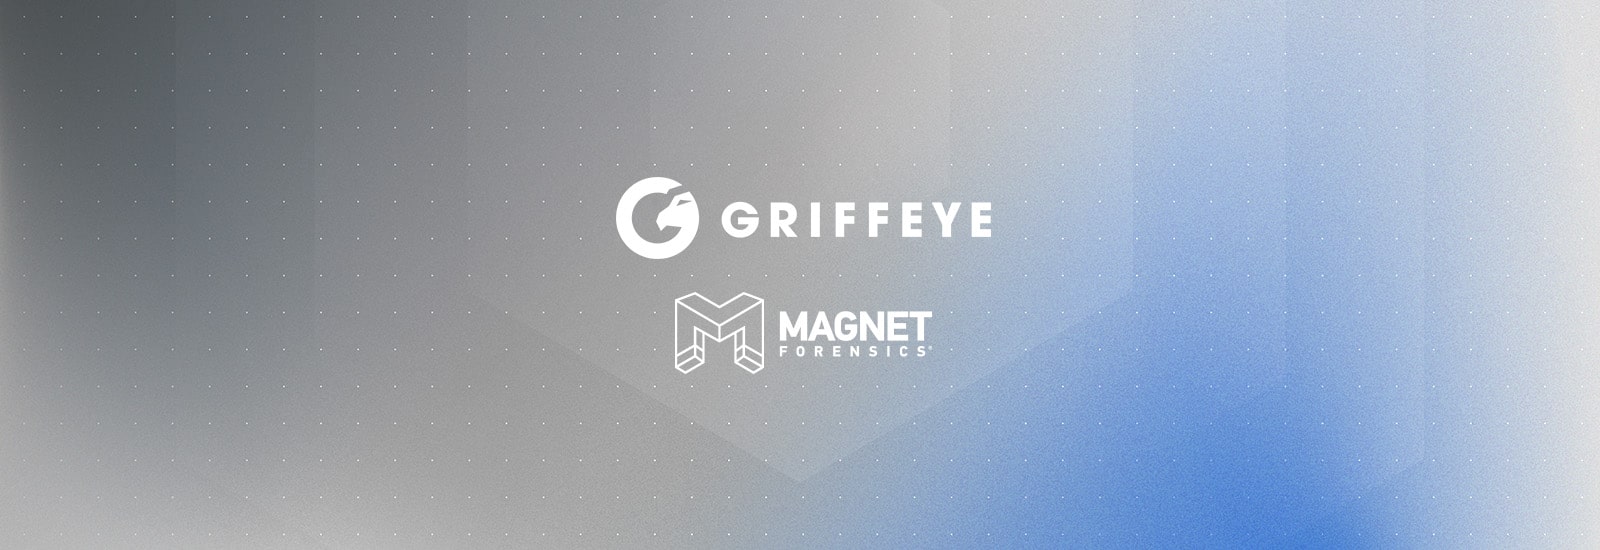 Magnet Forensics and Griffeye